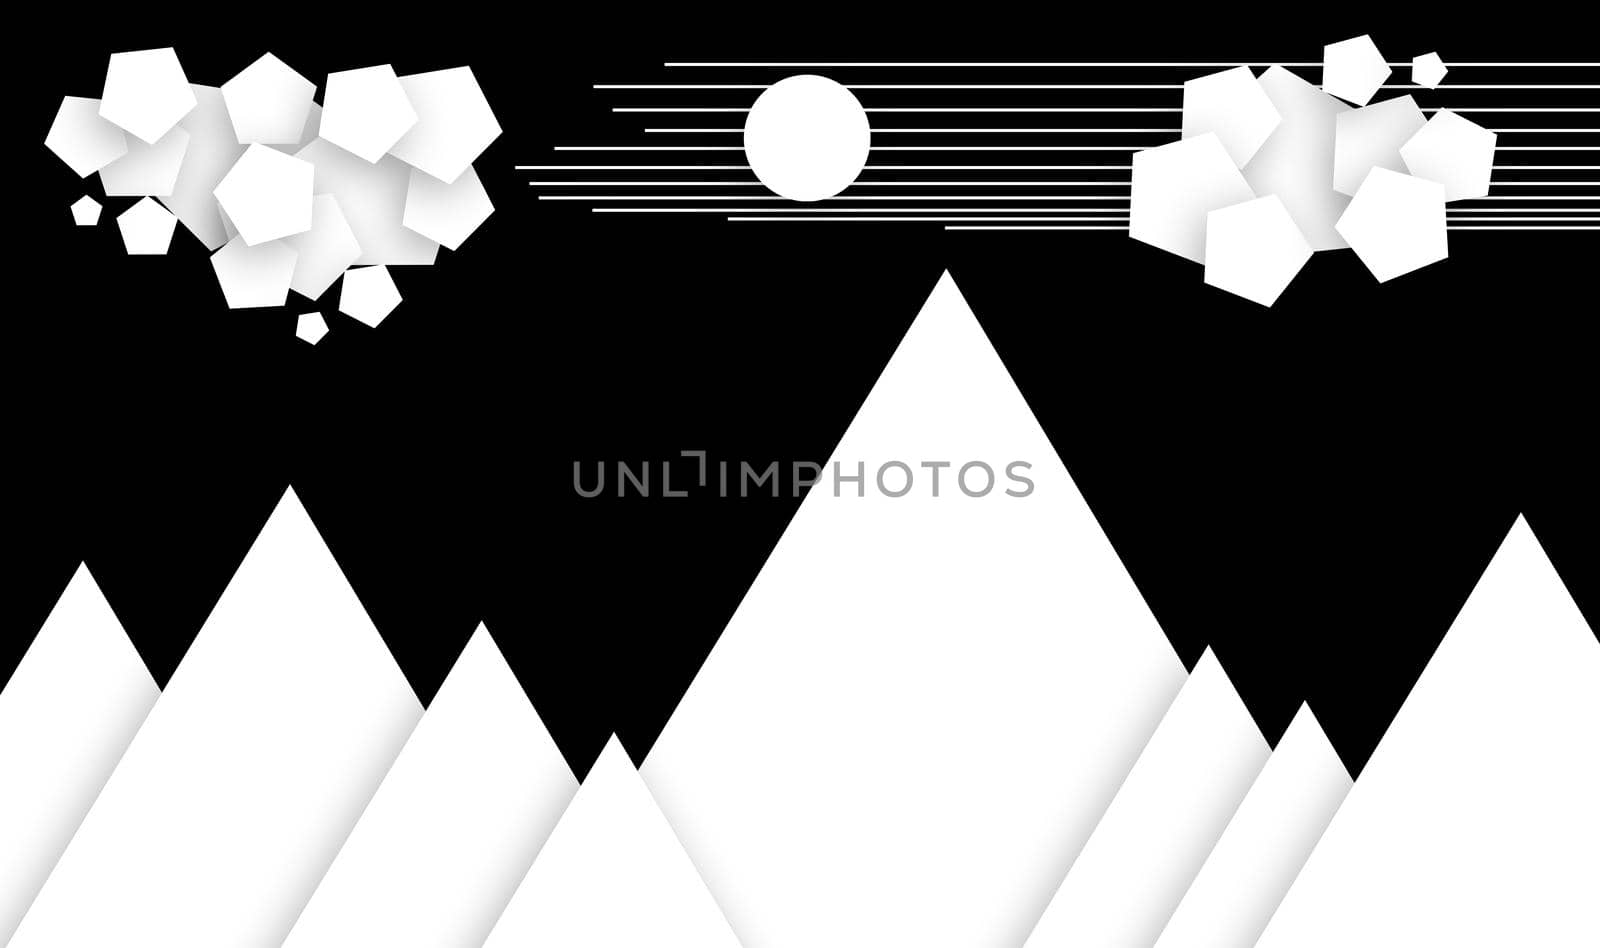 Nature scene made of shapes (mountain, cloud, sun, sky ) stock photo Abstract, At The Edge Of, Backgrounds, Black And White, Black Background by tabishere